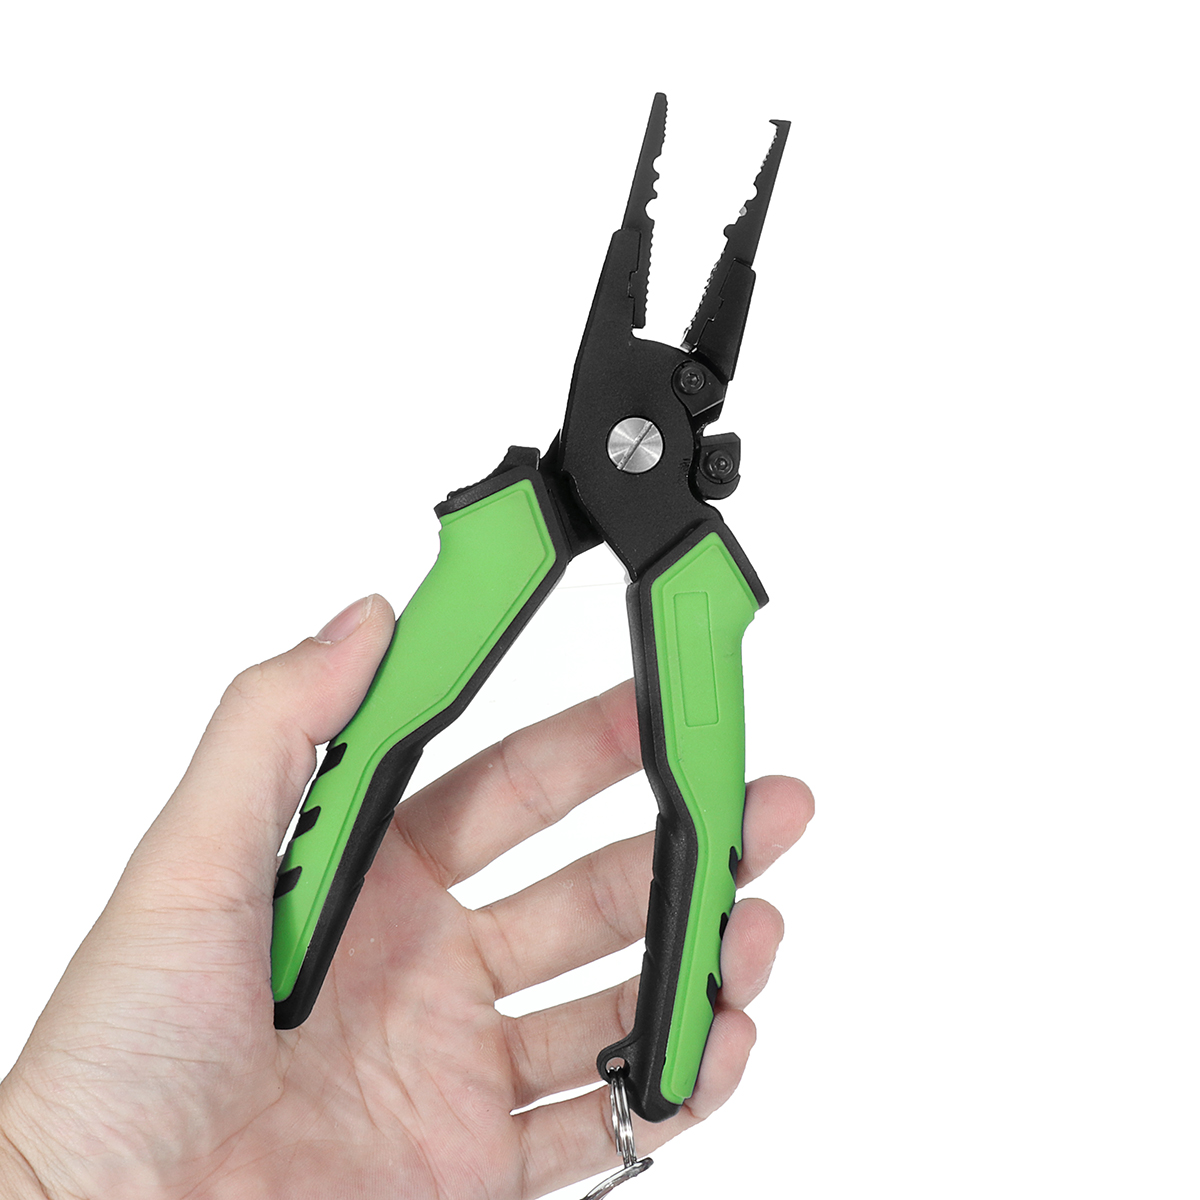 Portable-Aluminum-Alloy-Fishing-Grip-Fishing-Pliers-Split-Ring-Cutters-Line-Hook-Recover-Fishing-Tac-1586129-7